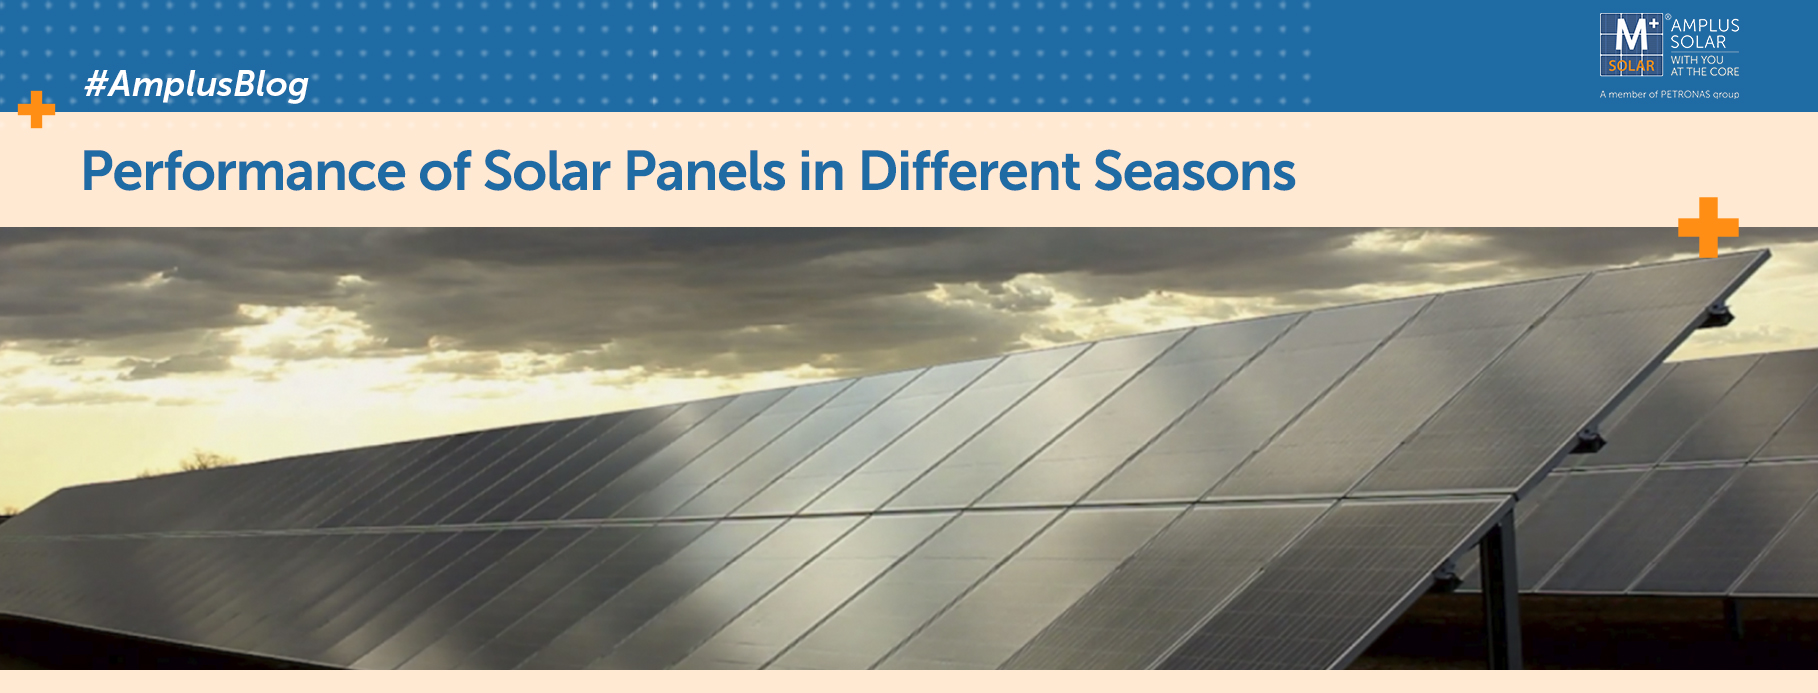 Performance of Solar Panels in Different Seasons